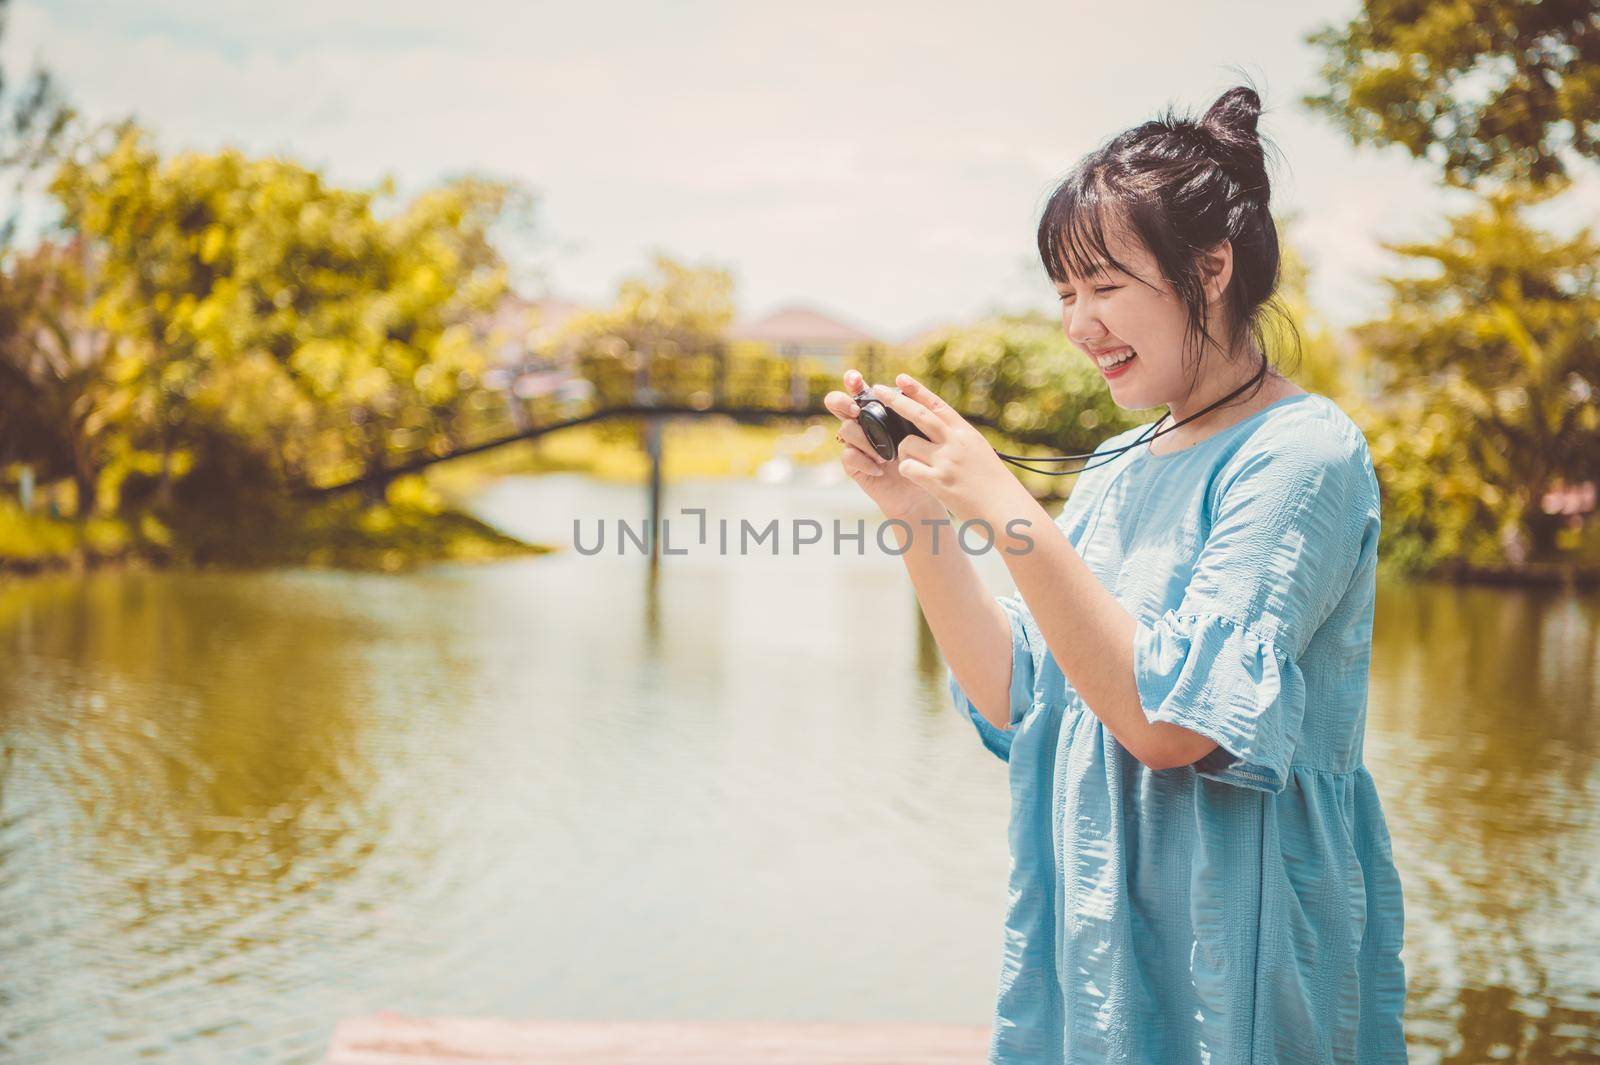 Asian woman in blue dress in public park carrying digital mirrorless camera and taking photo without facial mask in happy mood. People lifestyle and leisure concept. Outdoor travel and Nature theme. by MiniStocker